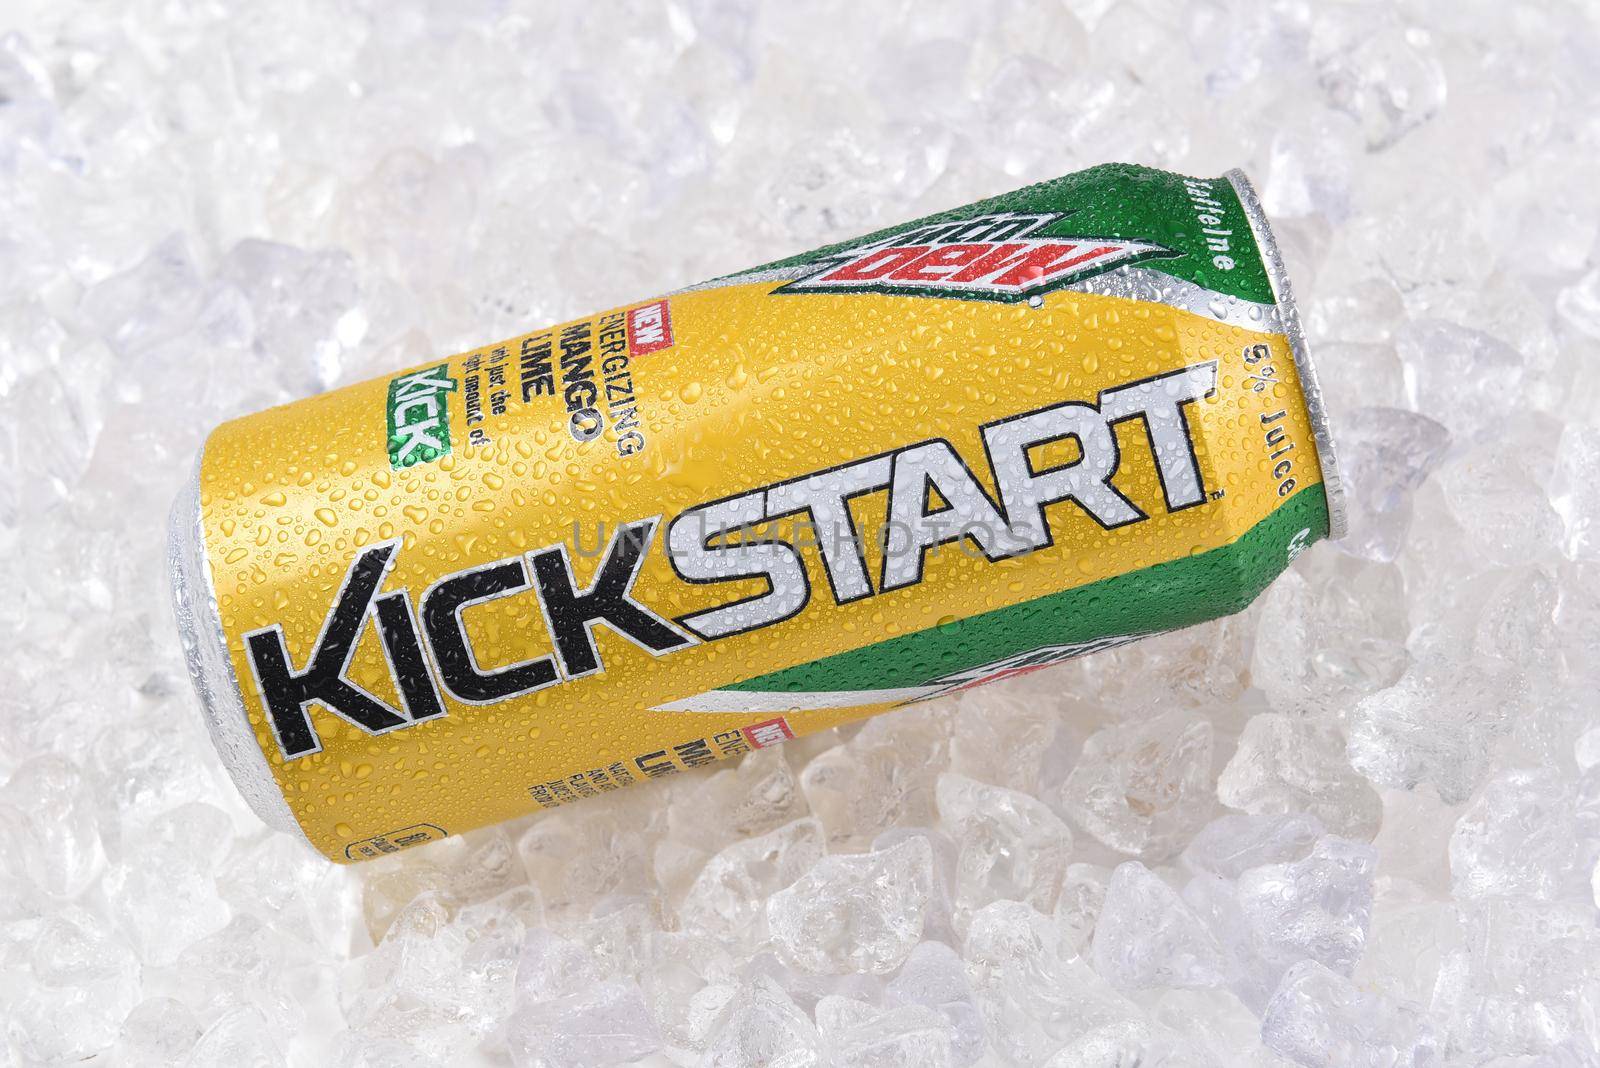 IRVINE, CA - DECEMBER, 15, 2017: A can of Mountain Dew Kickstart Mango Lime drink. From PepsiCo Kickstart is marketed as a healthier way to start your day rather than energy drinks.